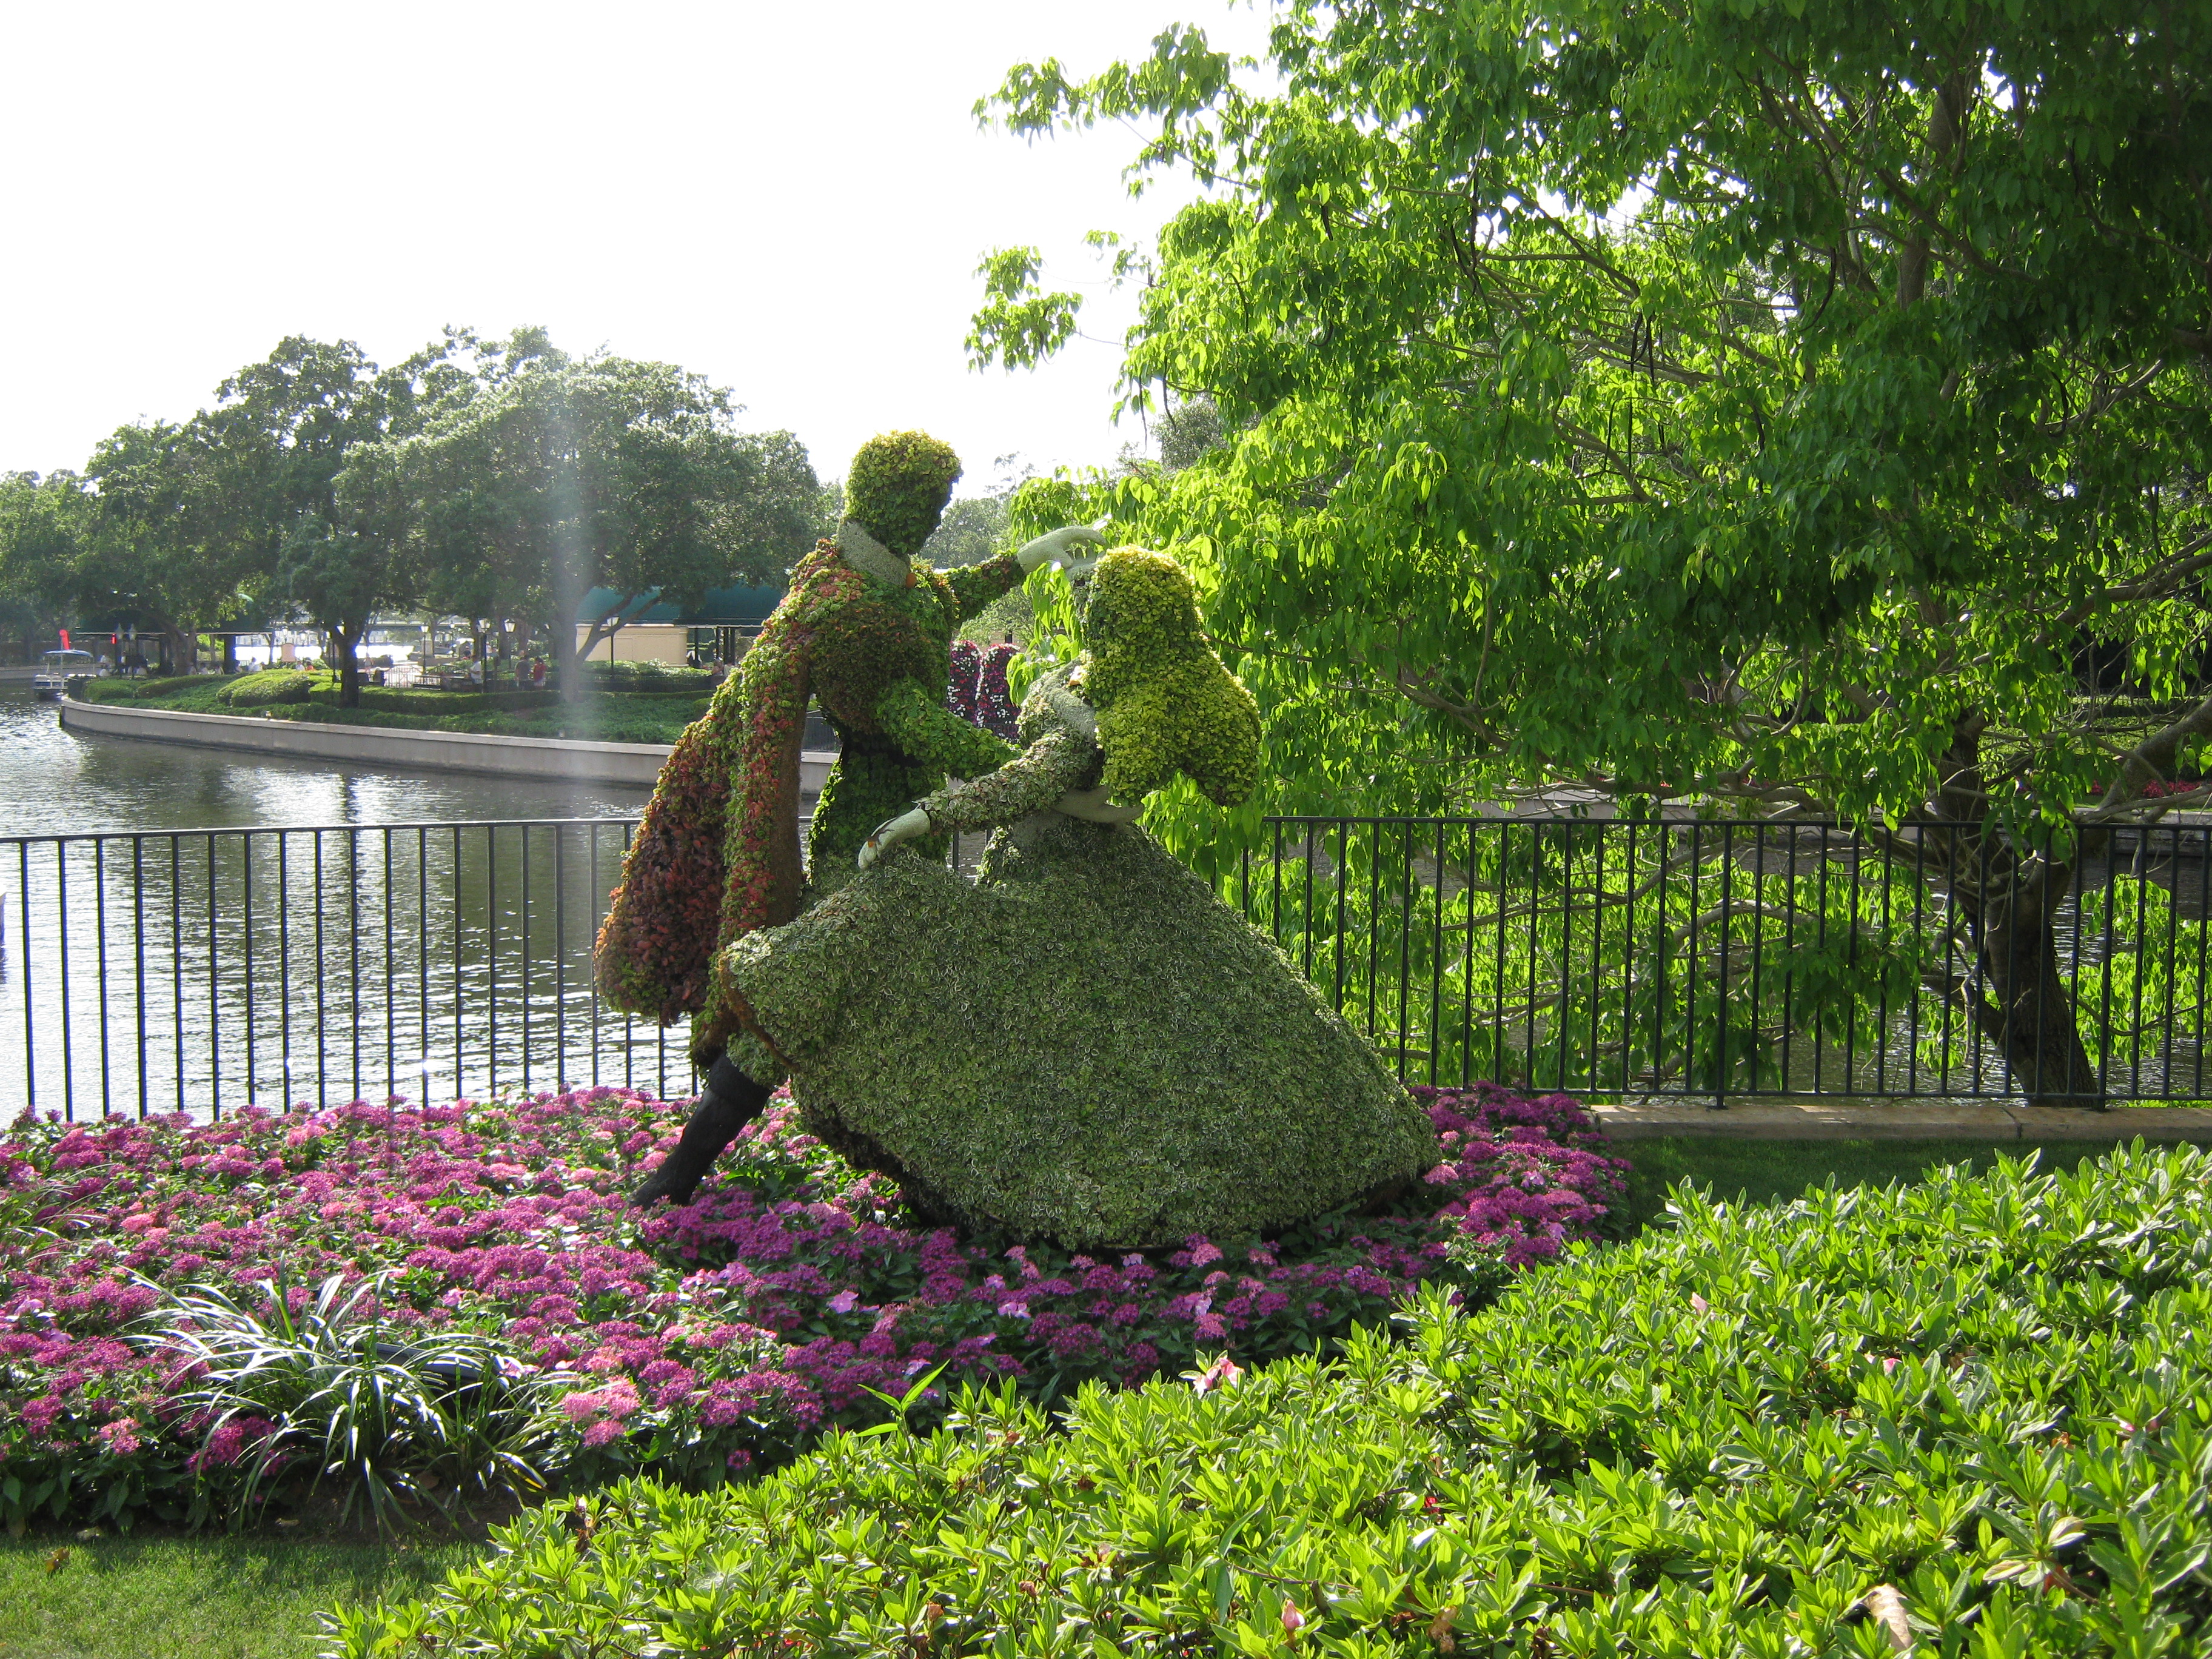 Bloomin’ Epcot at Disney’s Annual Flower and Garden Festival